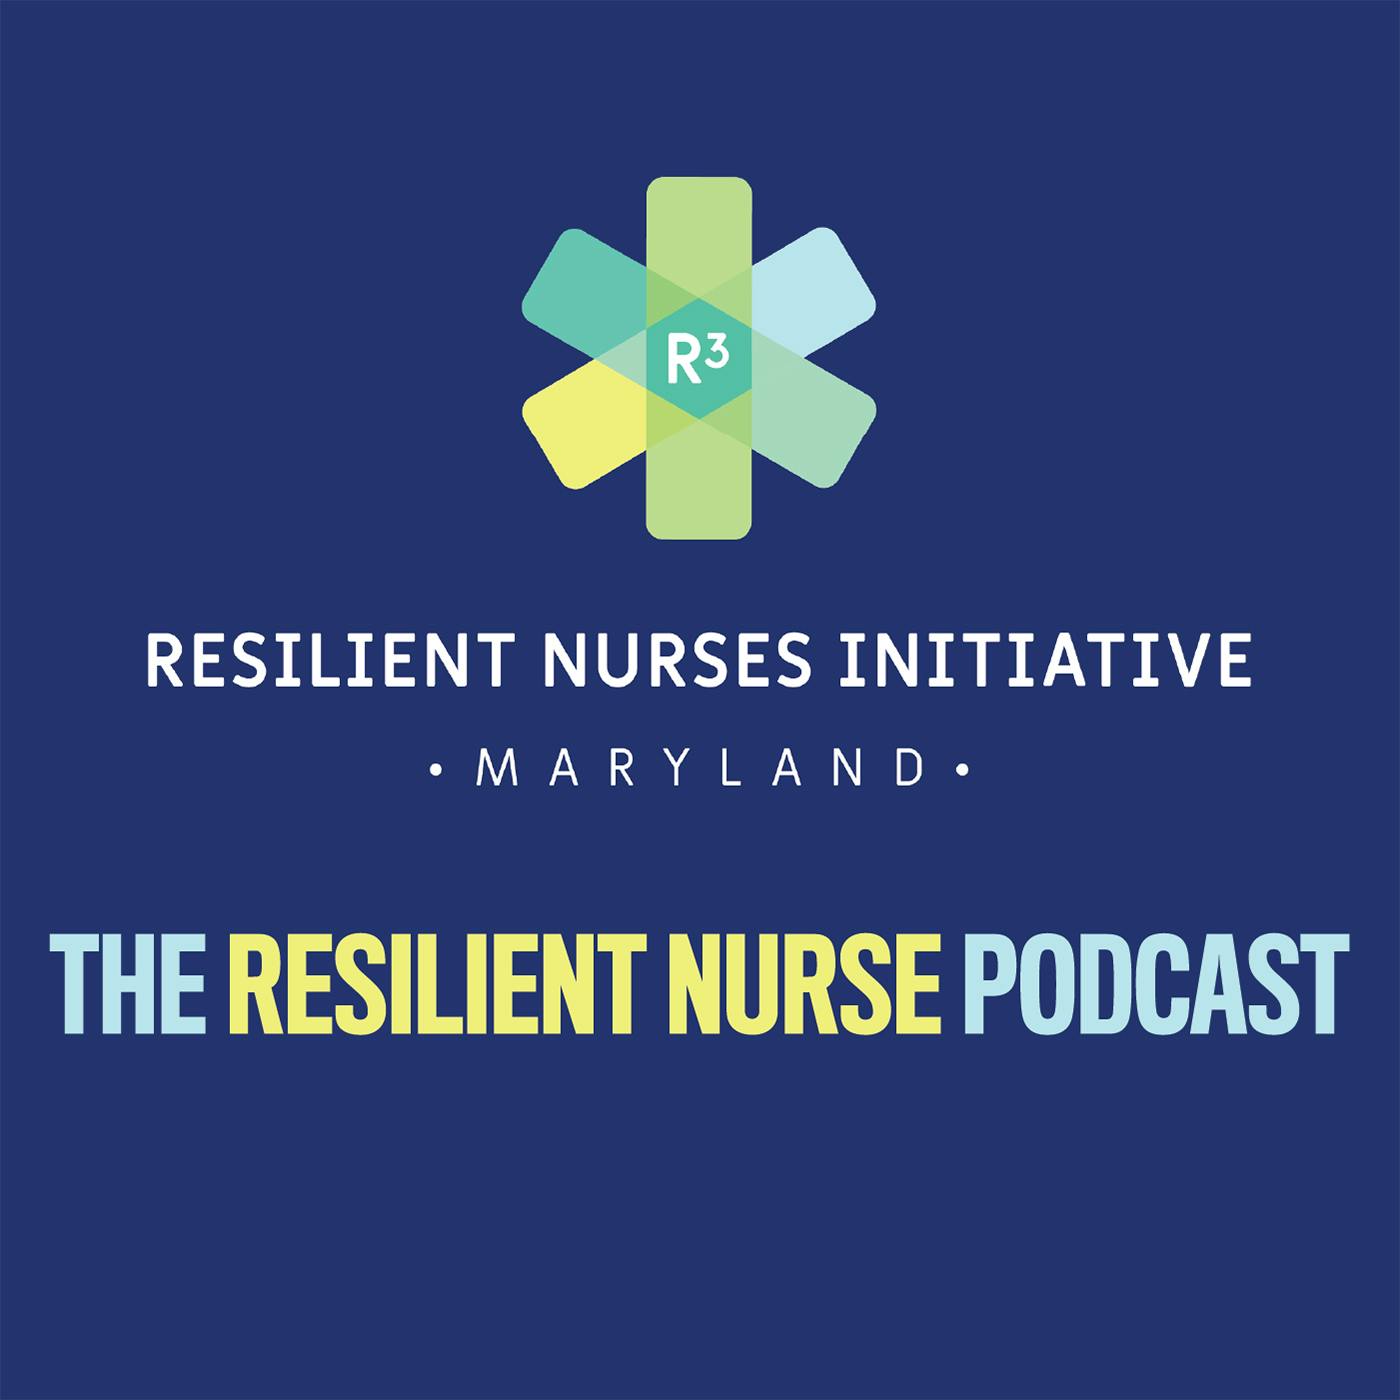 The Resilient Nurse, Episode 4: The State of Resilience in Our Nation’s Nurses